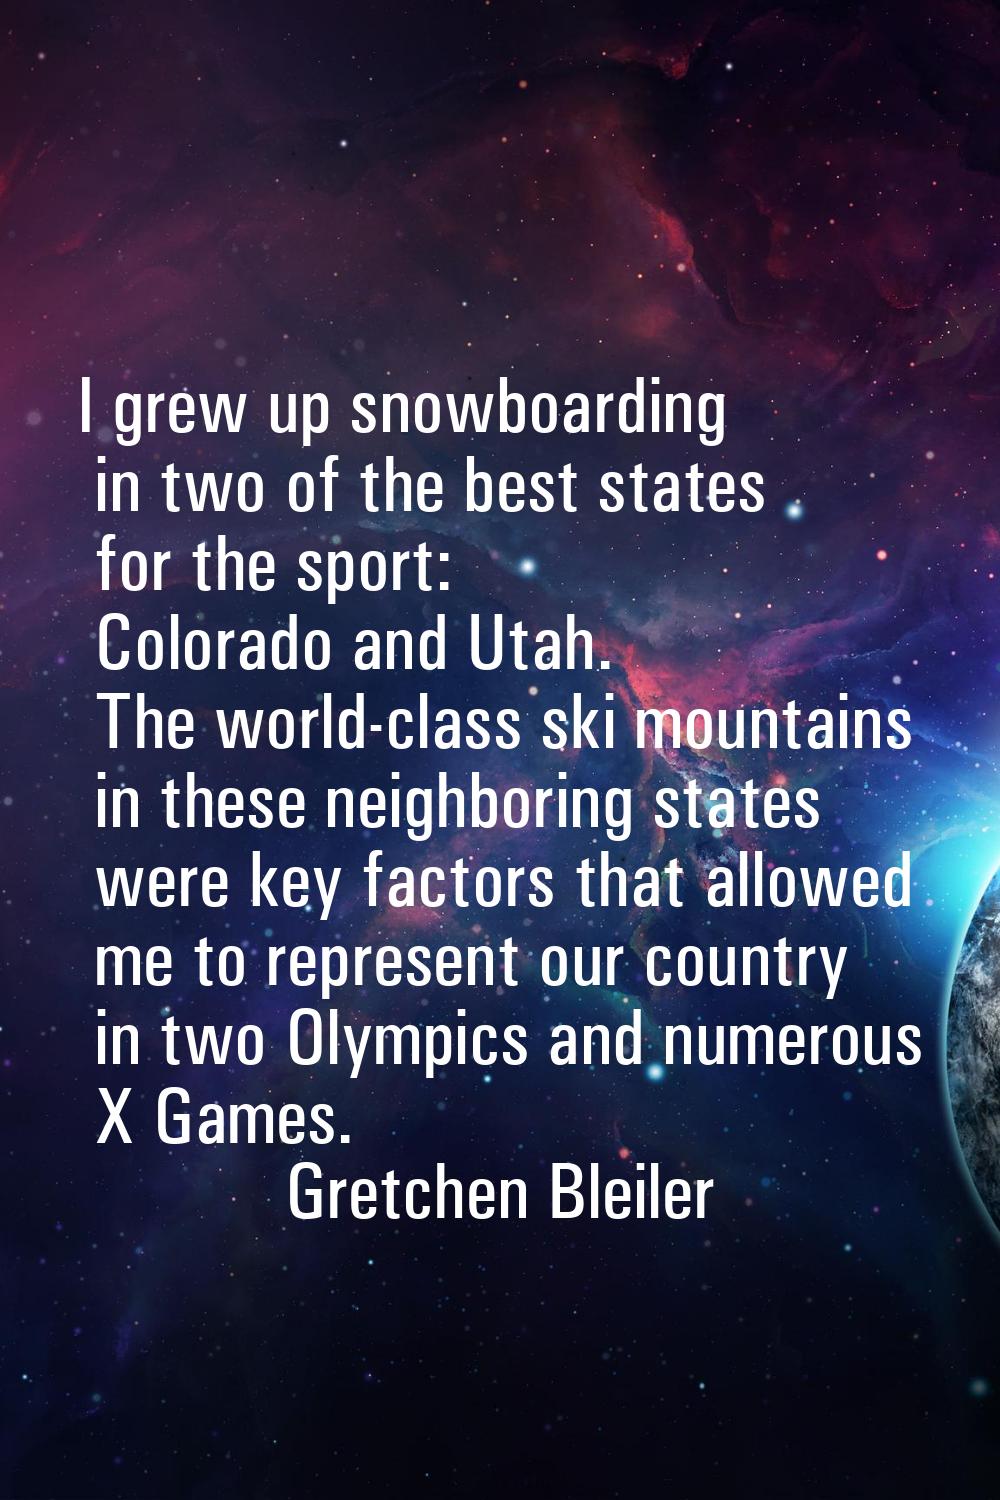 I grew up snowboarding in two of the best states for the sport: Colorado and Utah. The world-class 